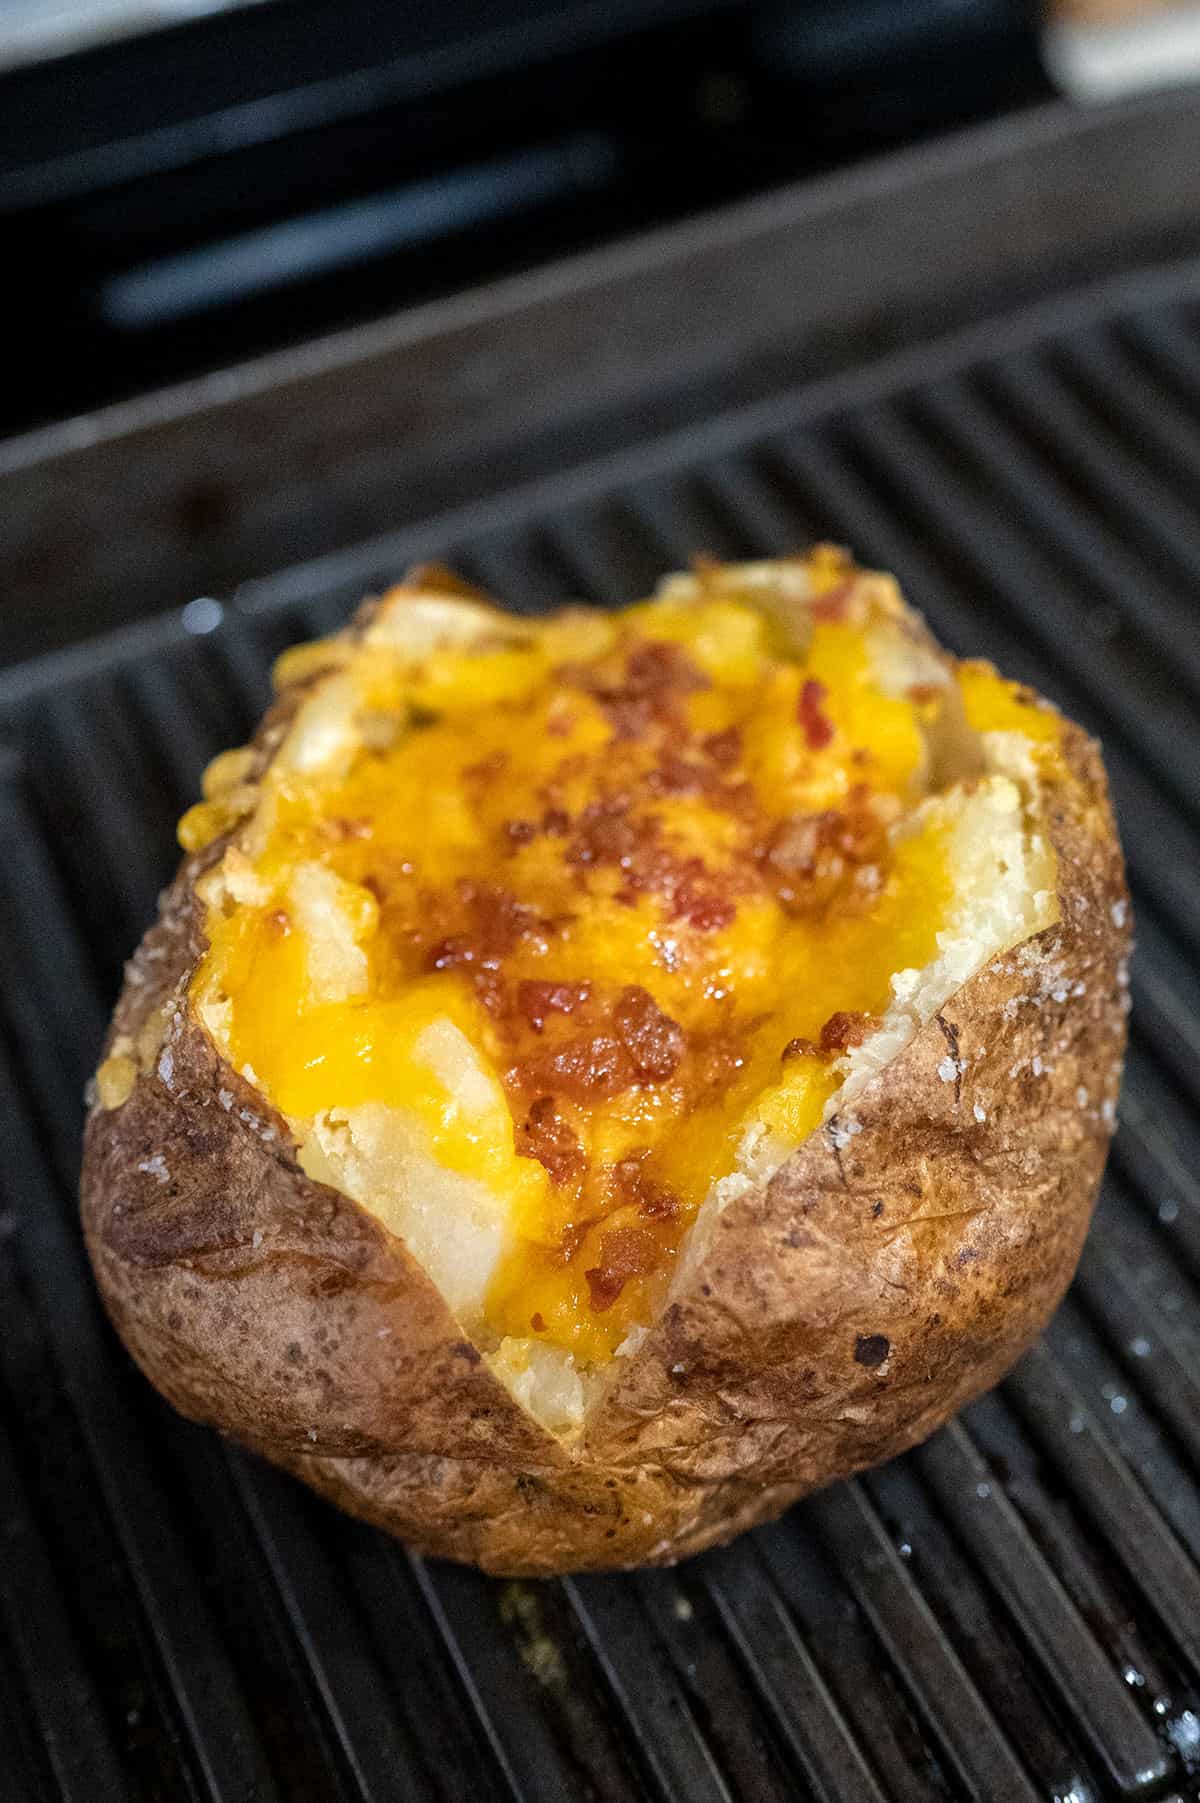 baked potato on Ninja foodi grill with melted cheese and bacon bits.